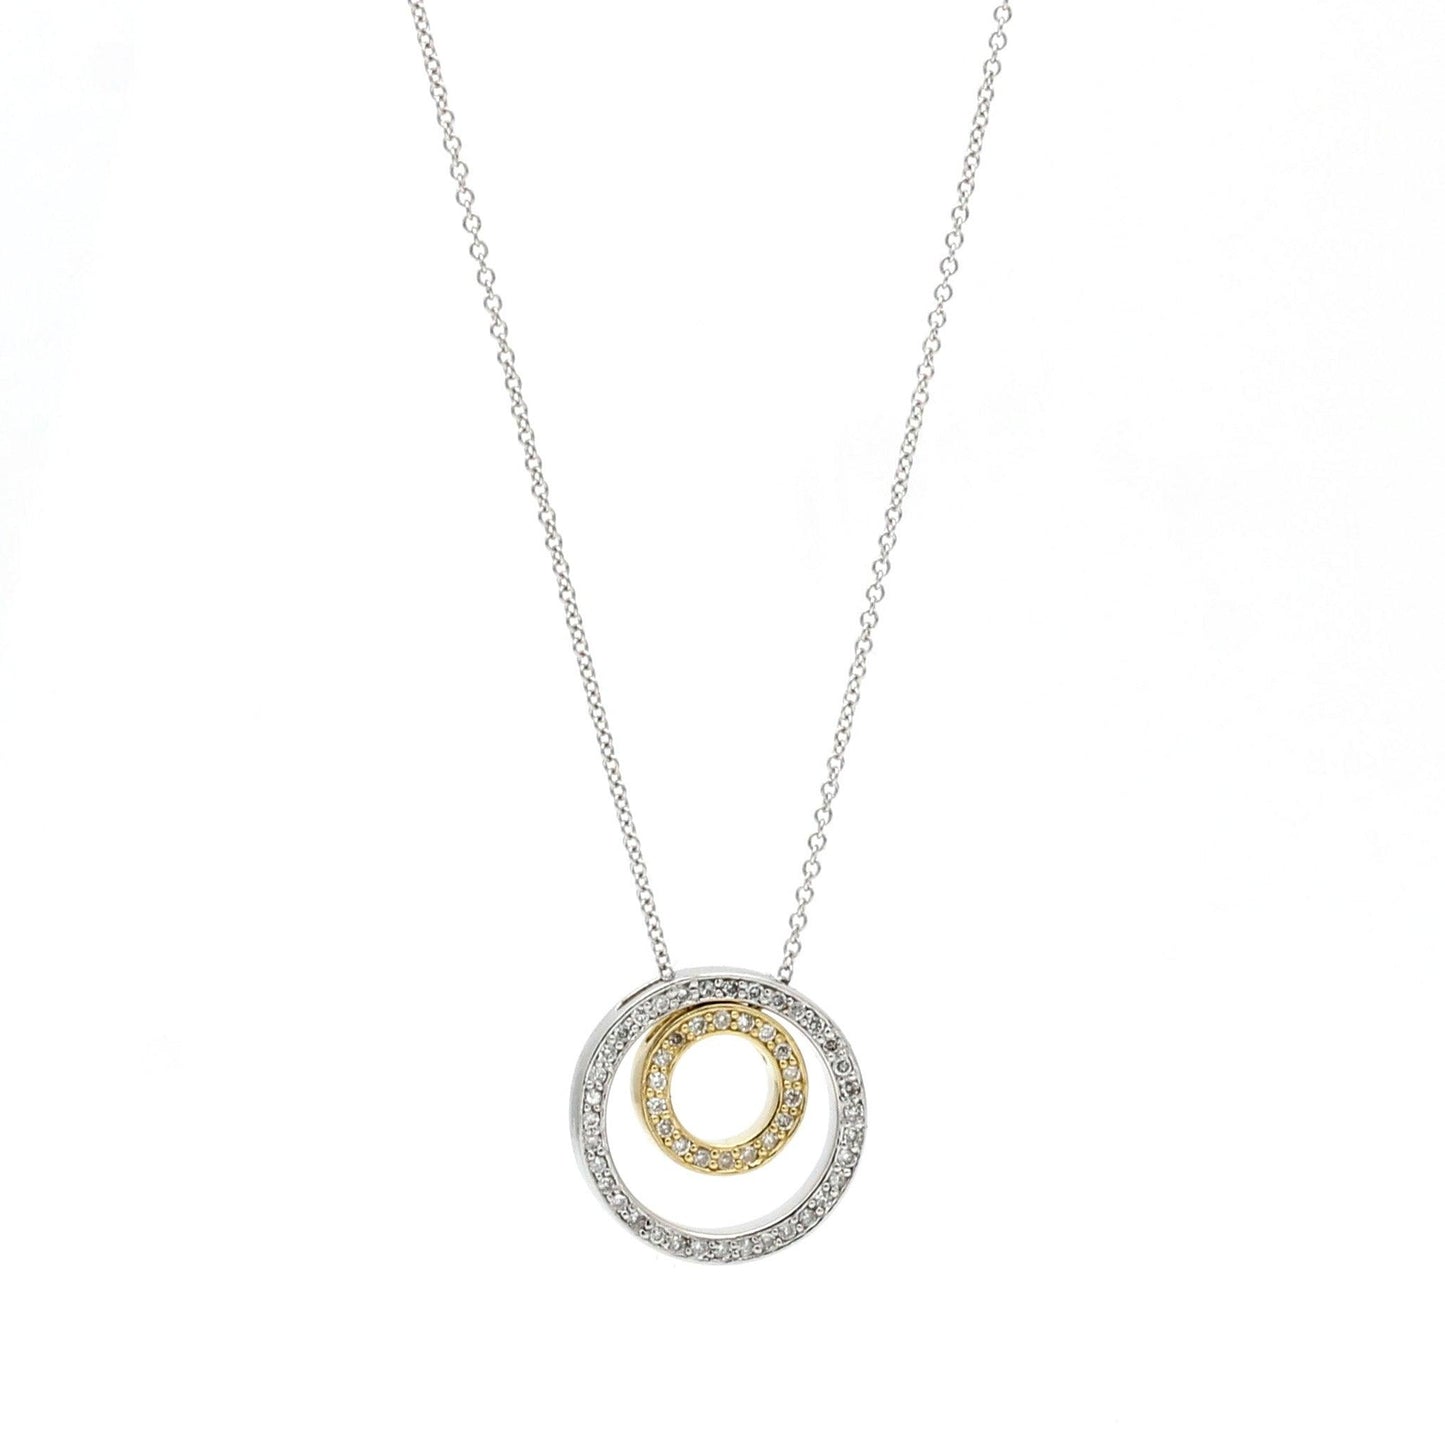 Women's Double Eternity Circles Pendant Necklace in 14k Yellow White Gold - 31 Jewels Inc.